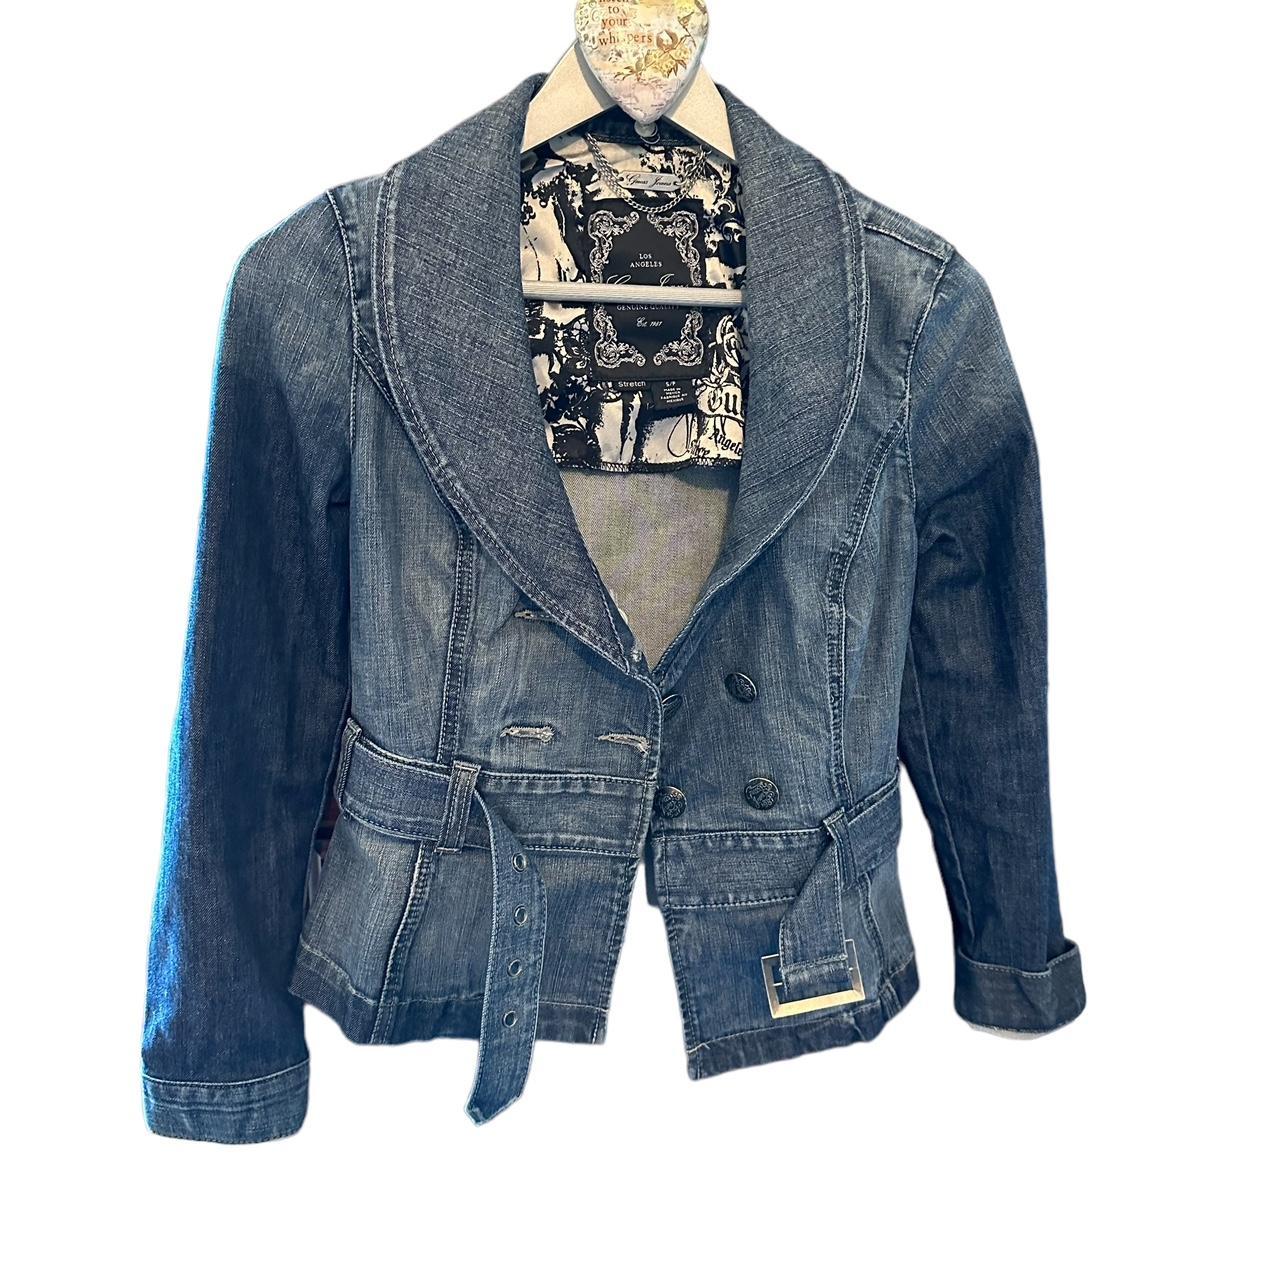 2 for $10囹L A Blues Denim Jacket Women's Size Small | Denim jacket women,  Blue denim jacket, Denim jacket patches